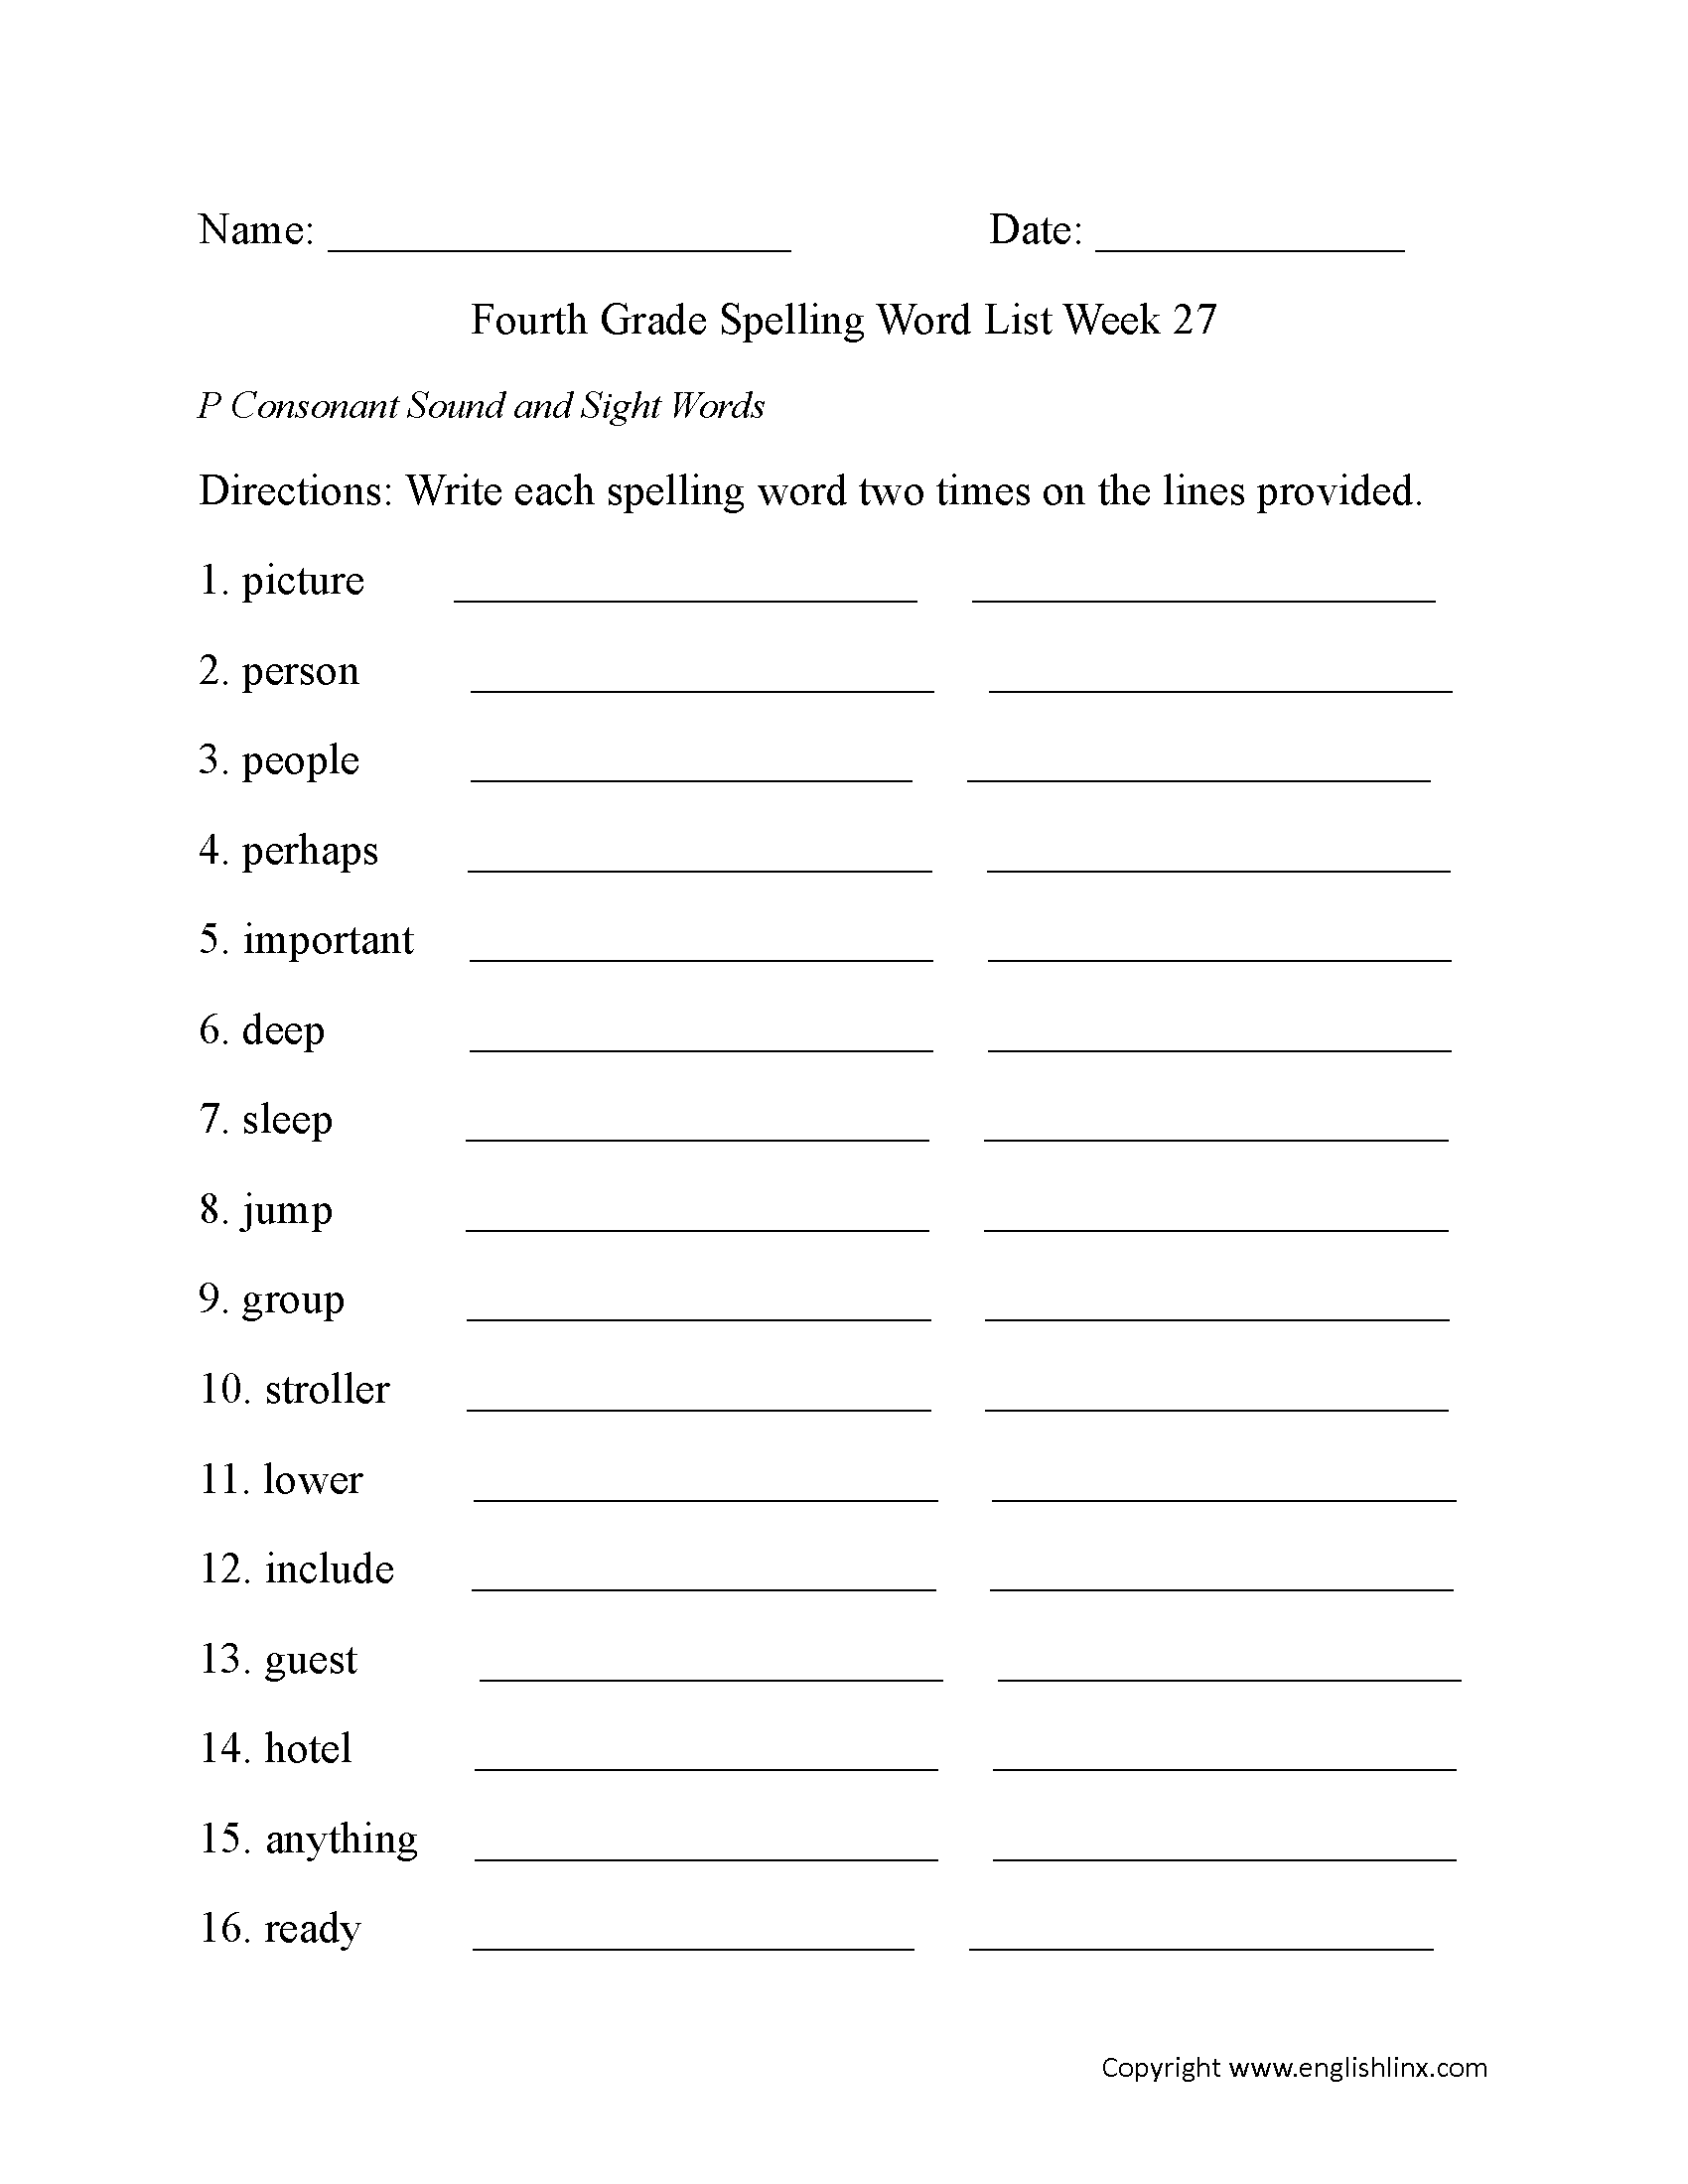 Week 27 P Consonant and Sight Words Fourth Grade Spelling Words Worksheets